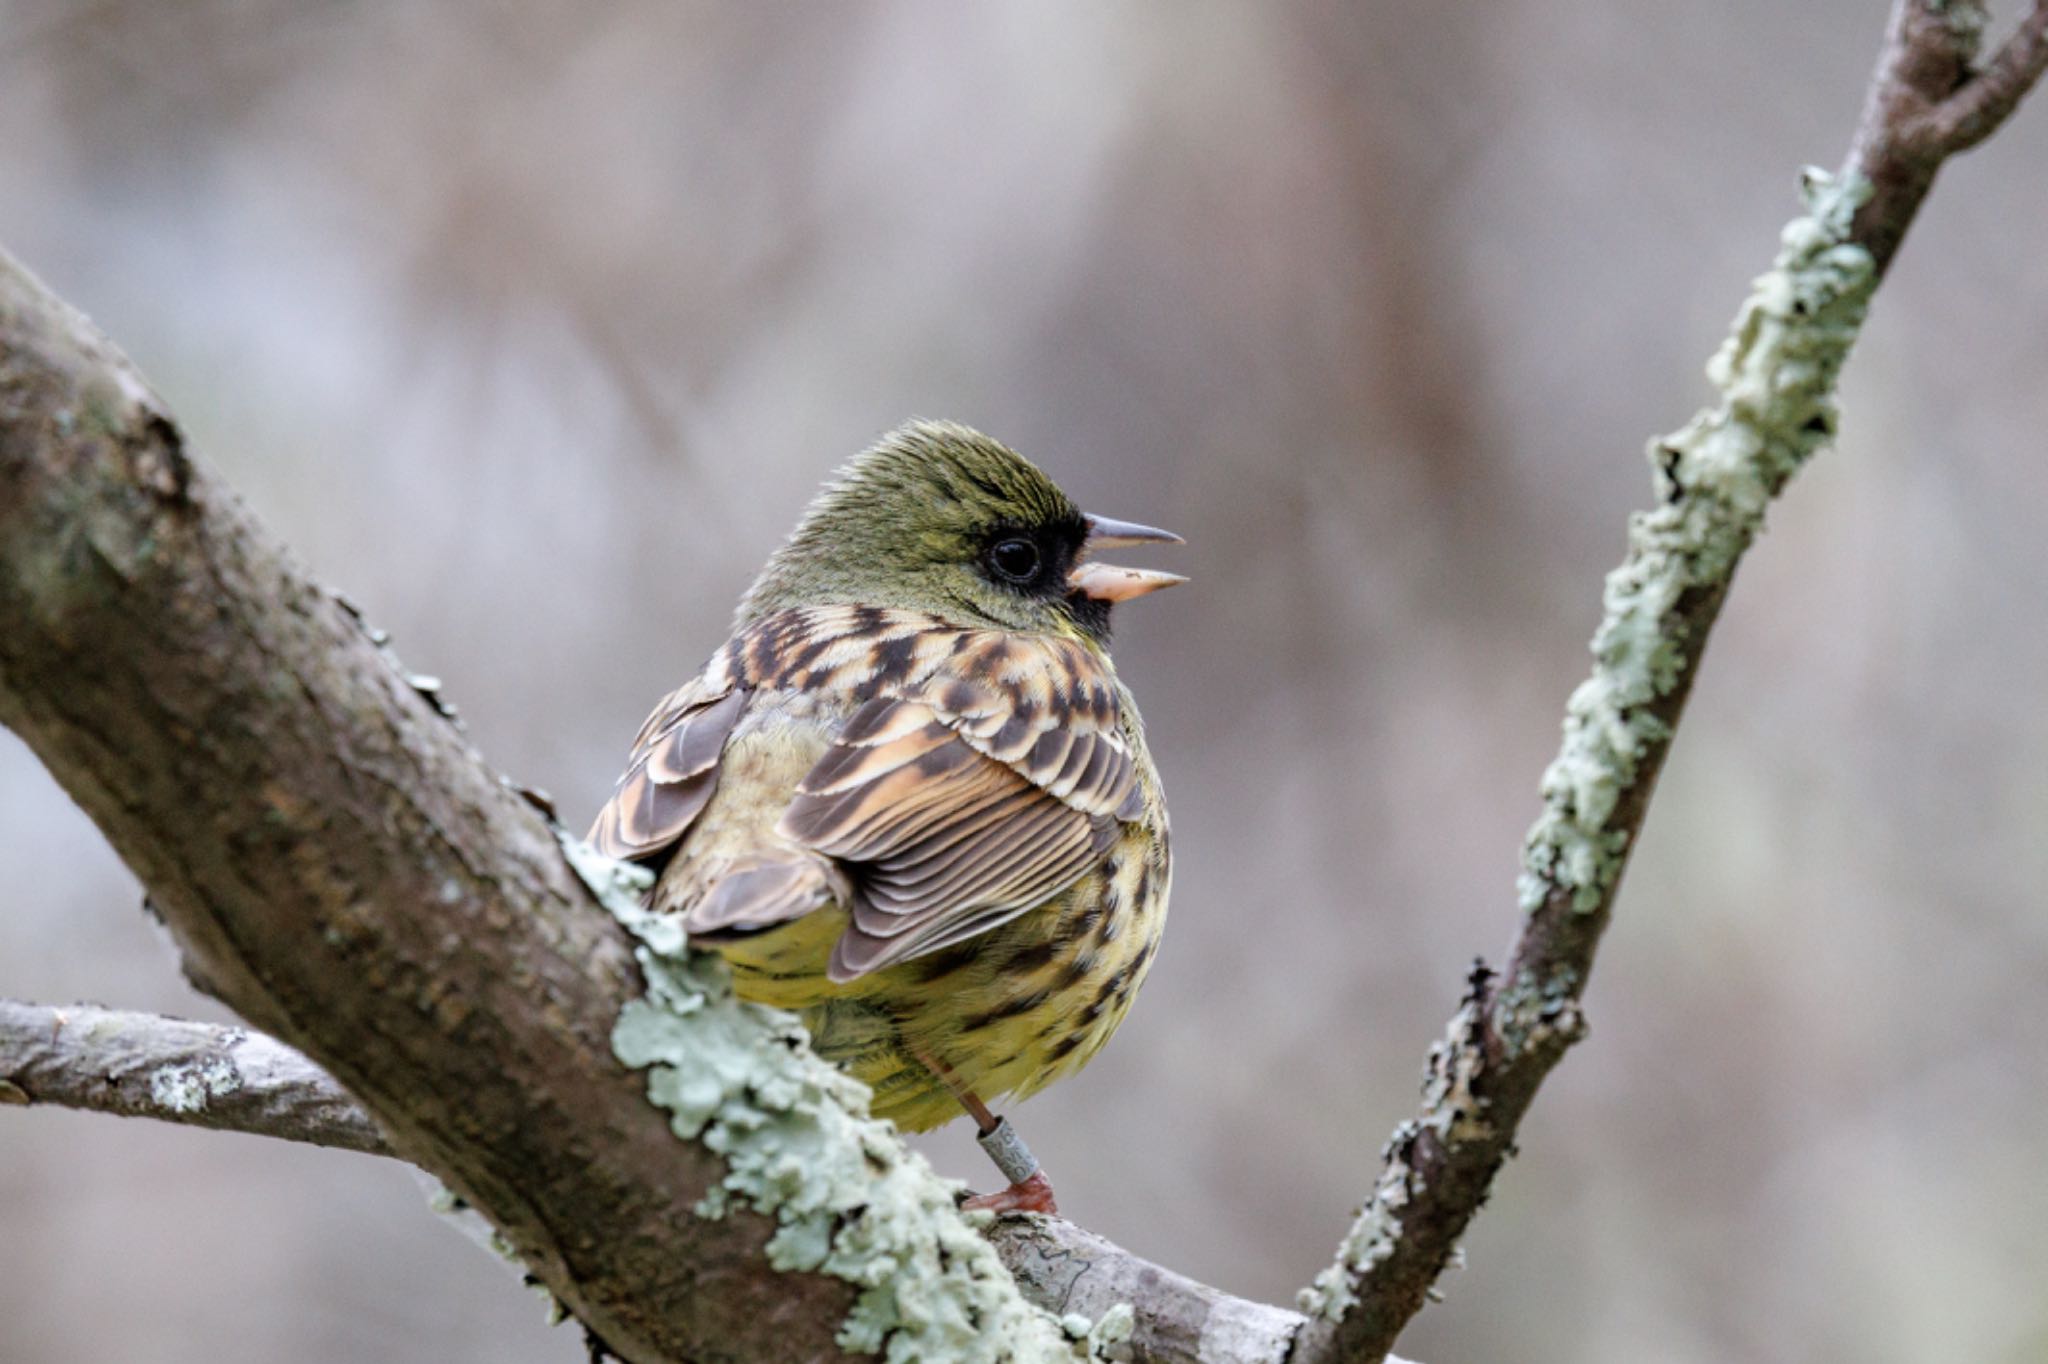 Photo of Masked Bunting at Tomakomai Experimental Forest by シマシマ38